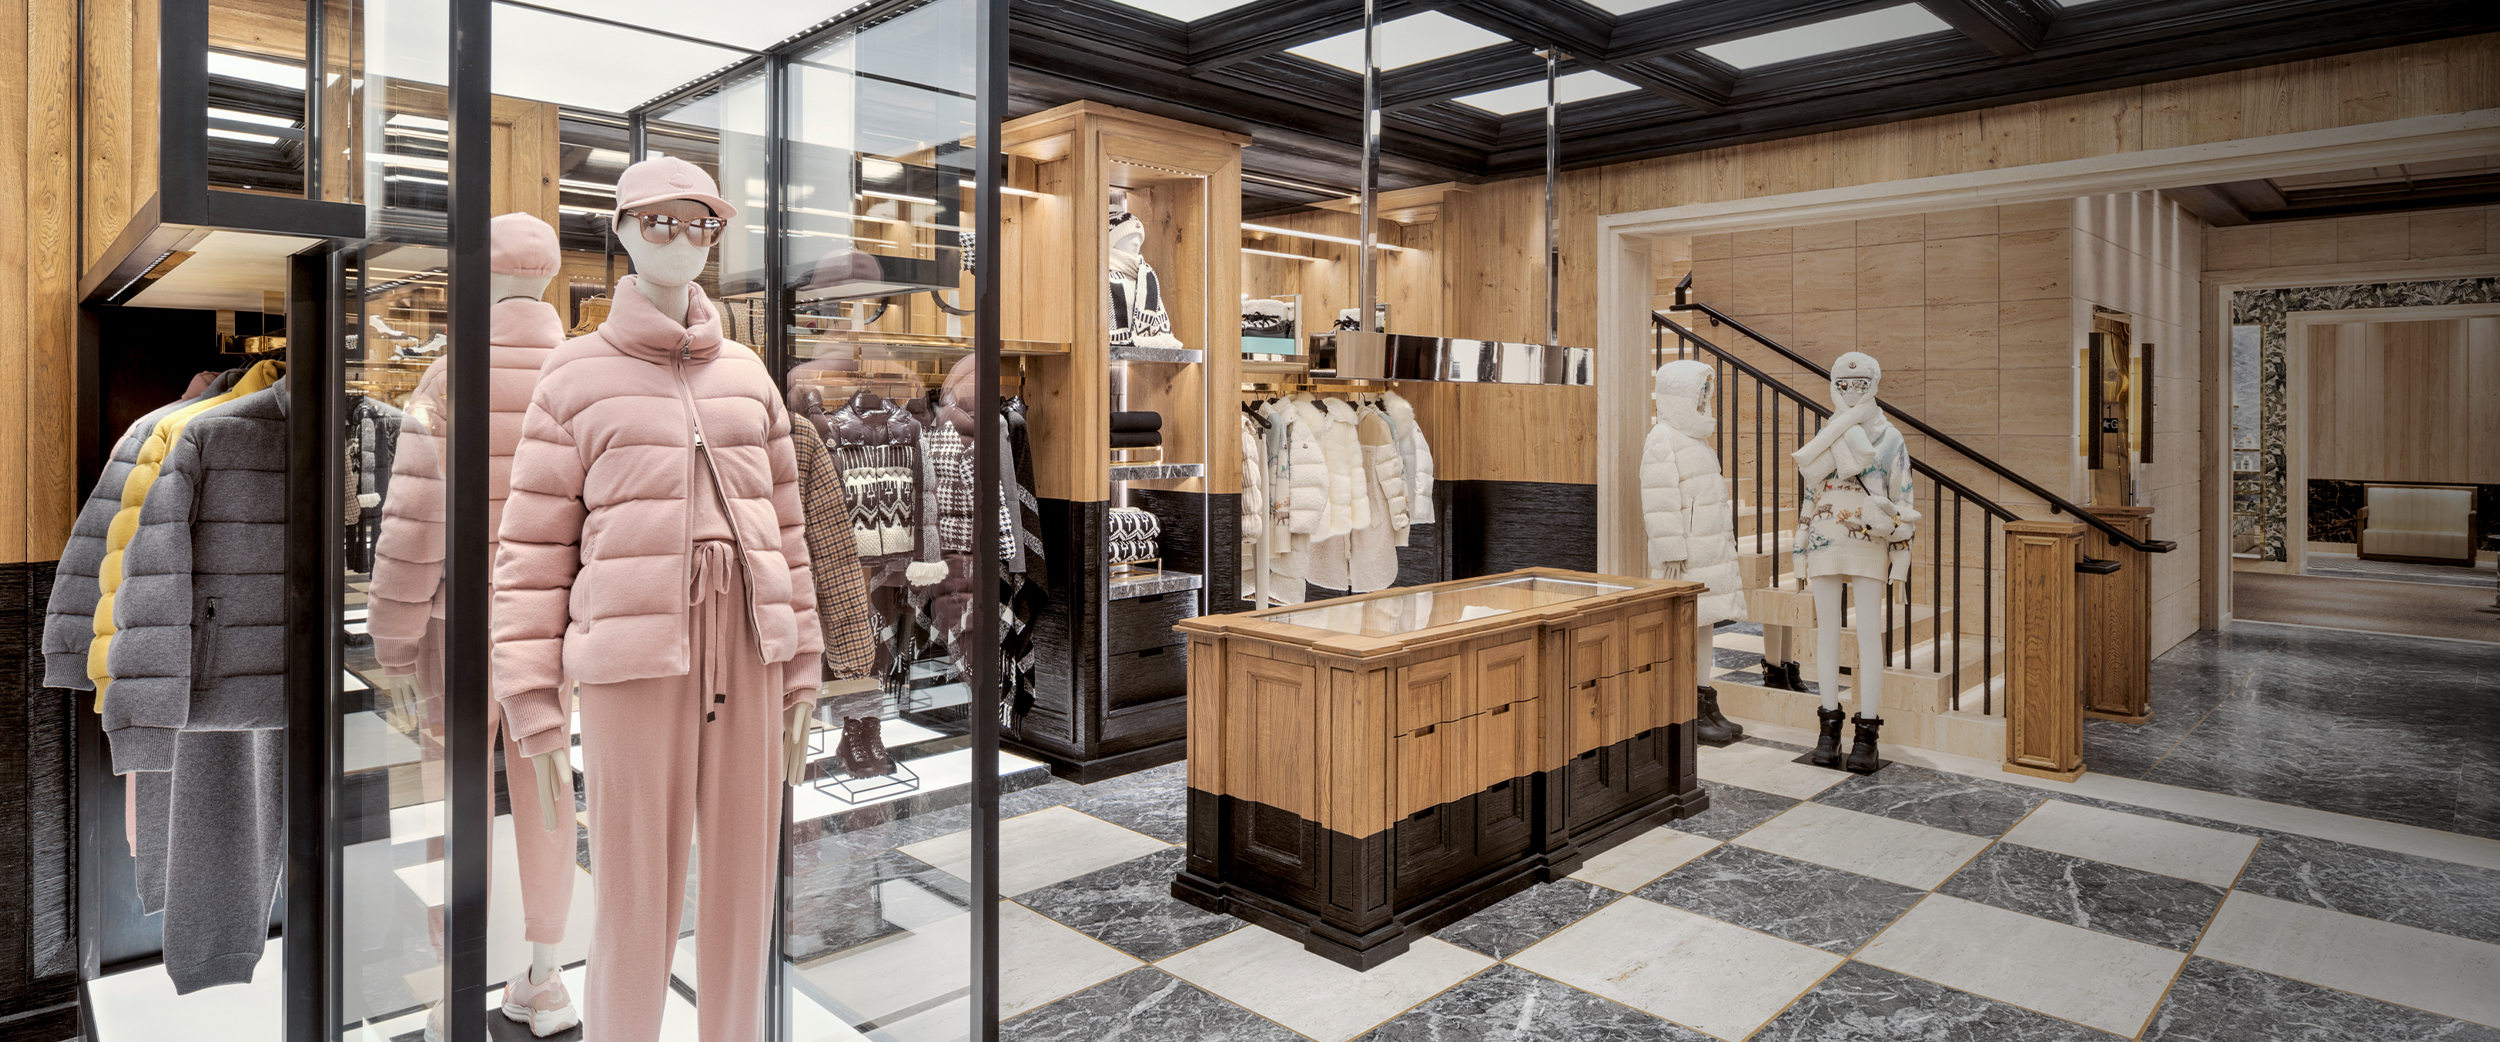 Gucci opens 2nd flagship store in central Seoul - Pulse by Maeil